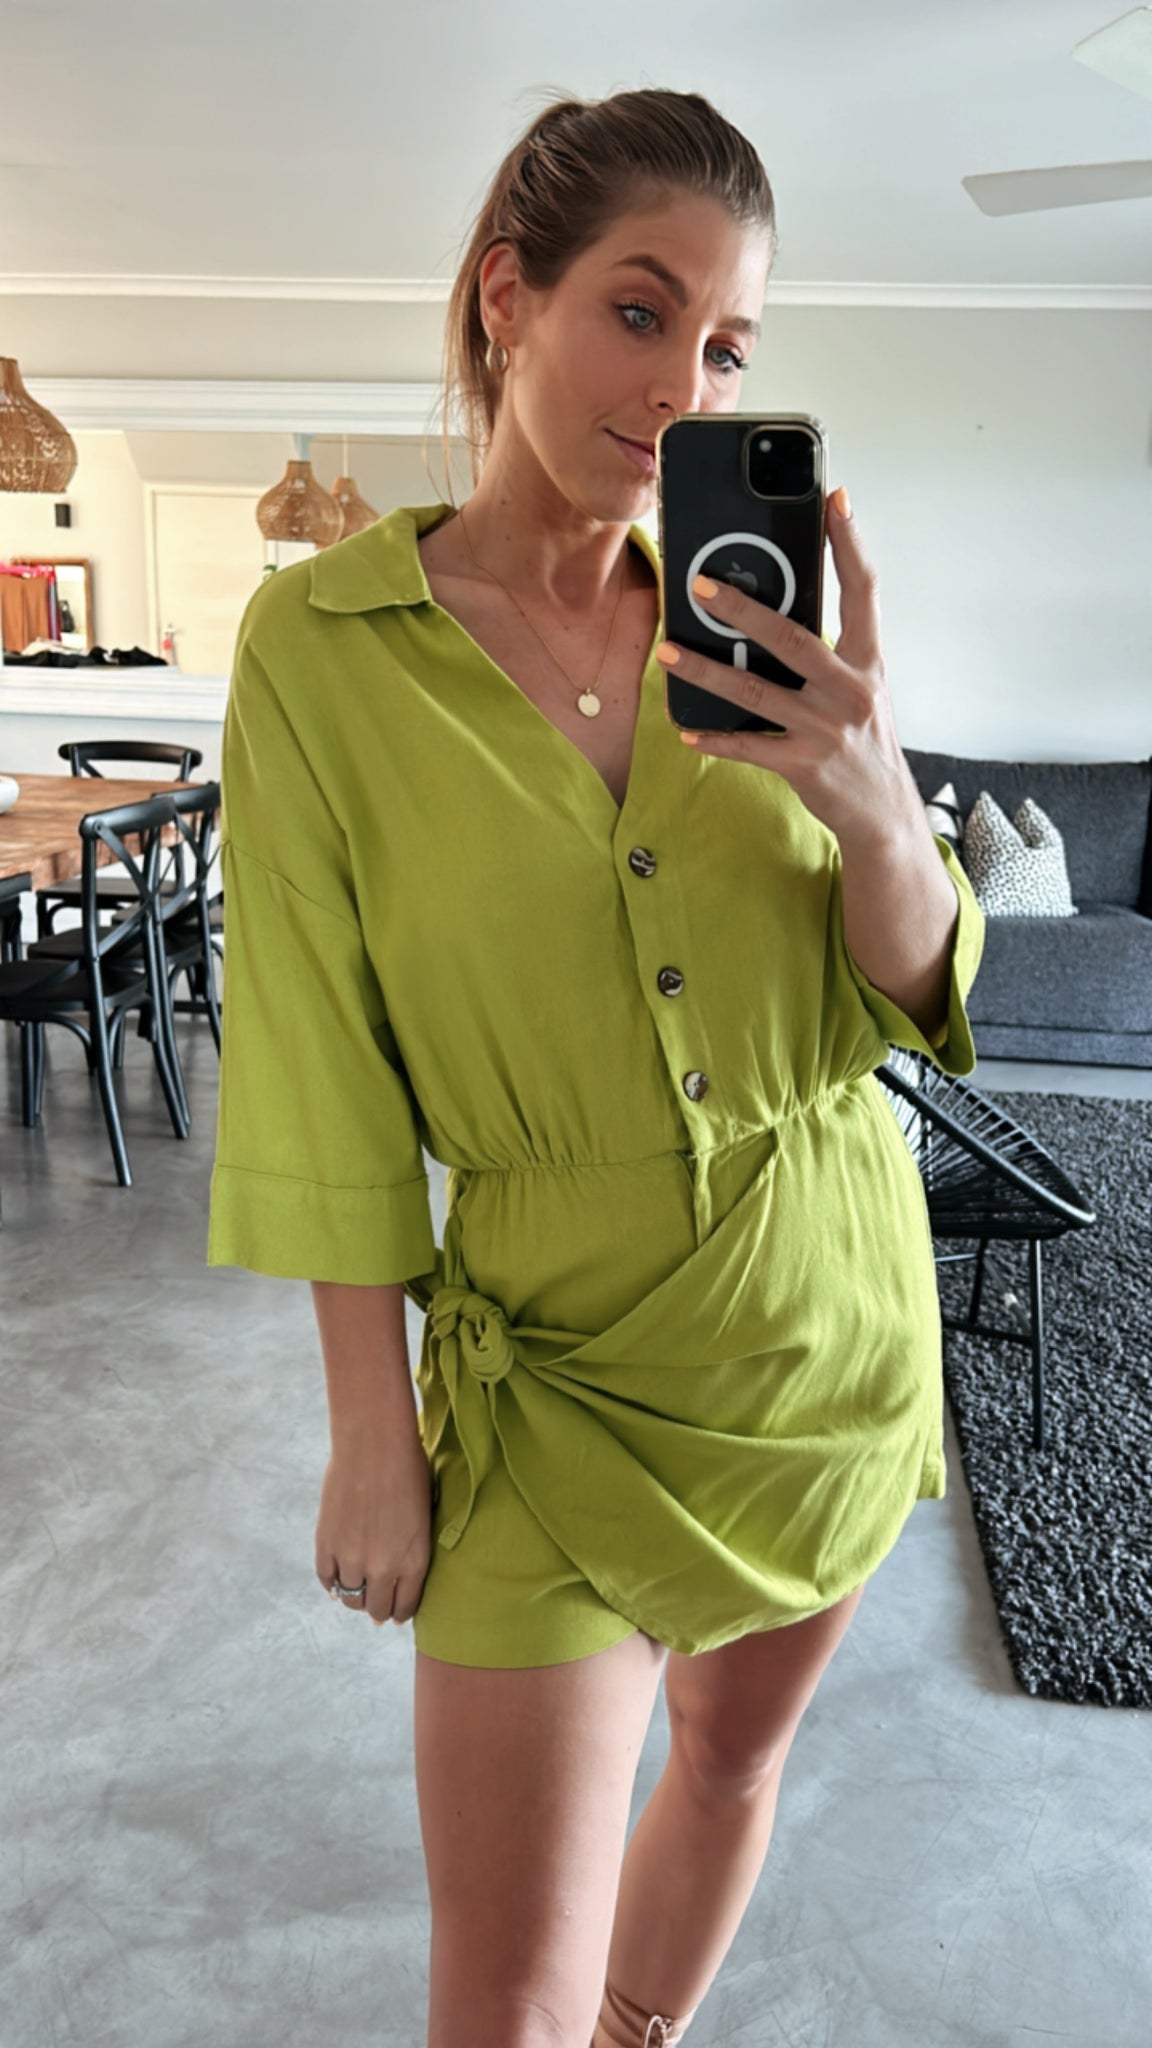 CHARTREUSE COLLARED SKORT PLAYSUIT